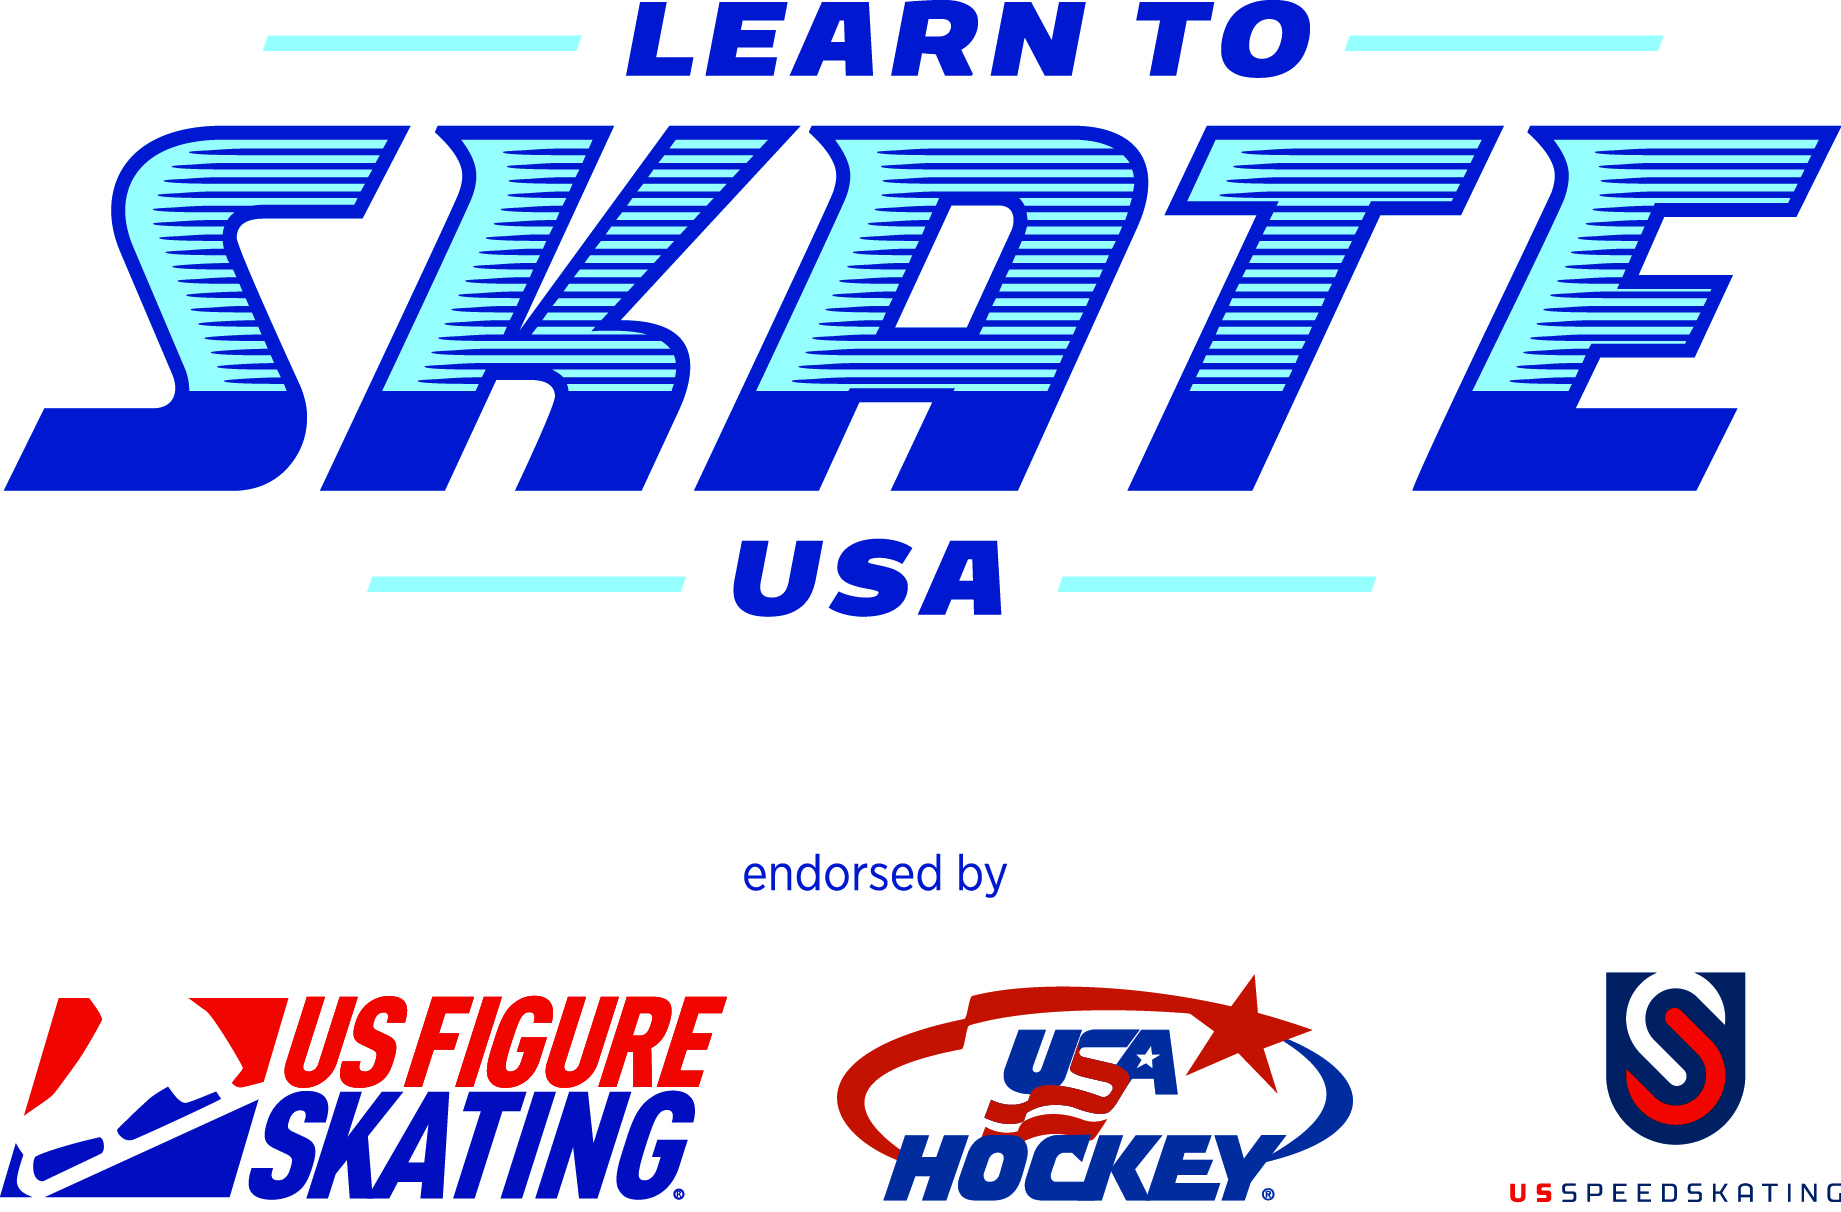 Learn to Skate USA - Endorsed by US Figure Skating, USA Hockey, and US Speedskating